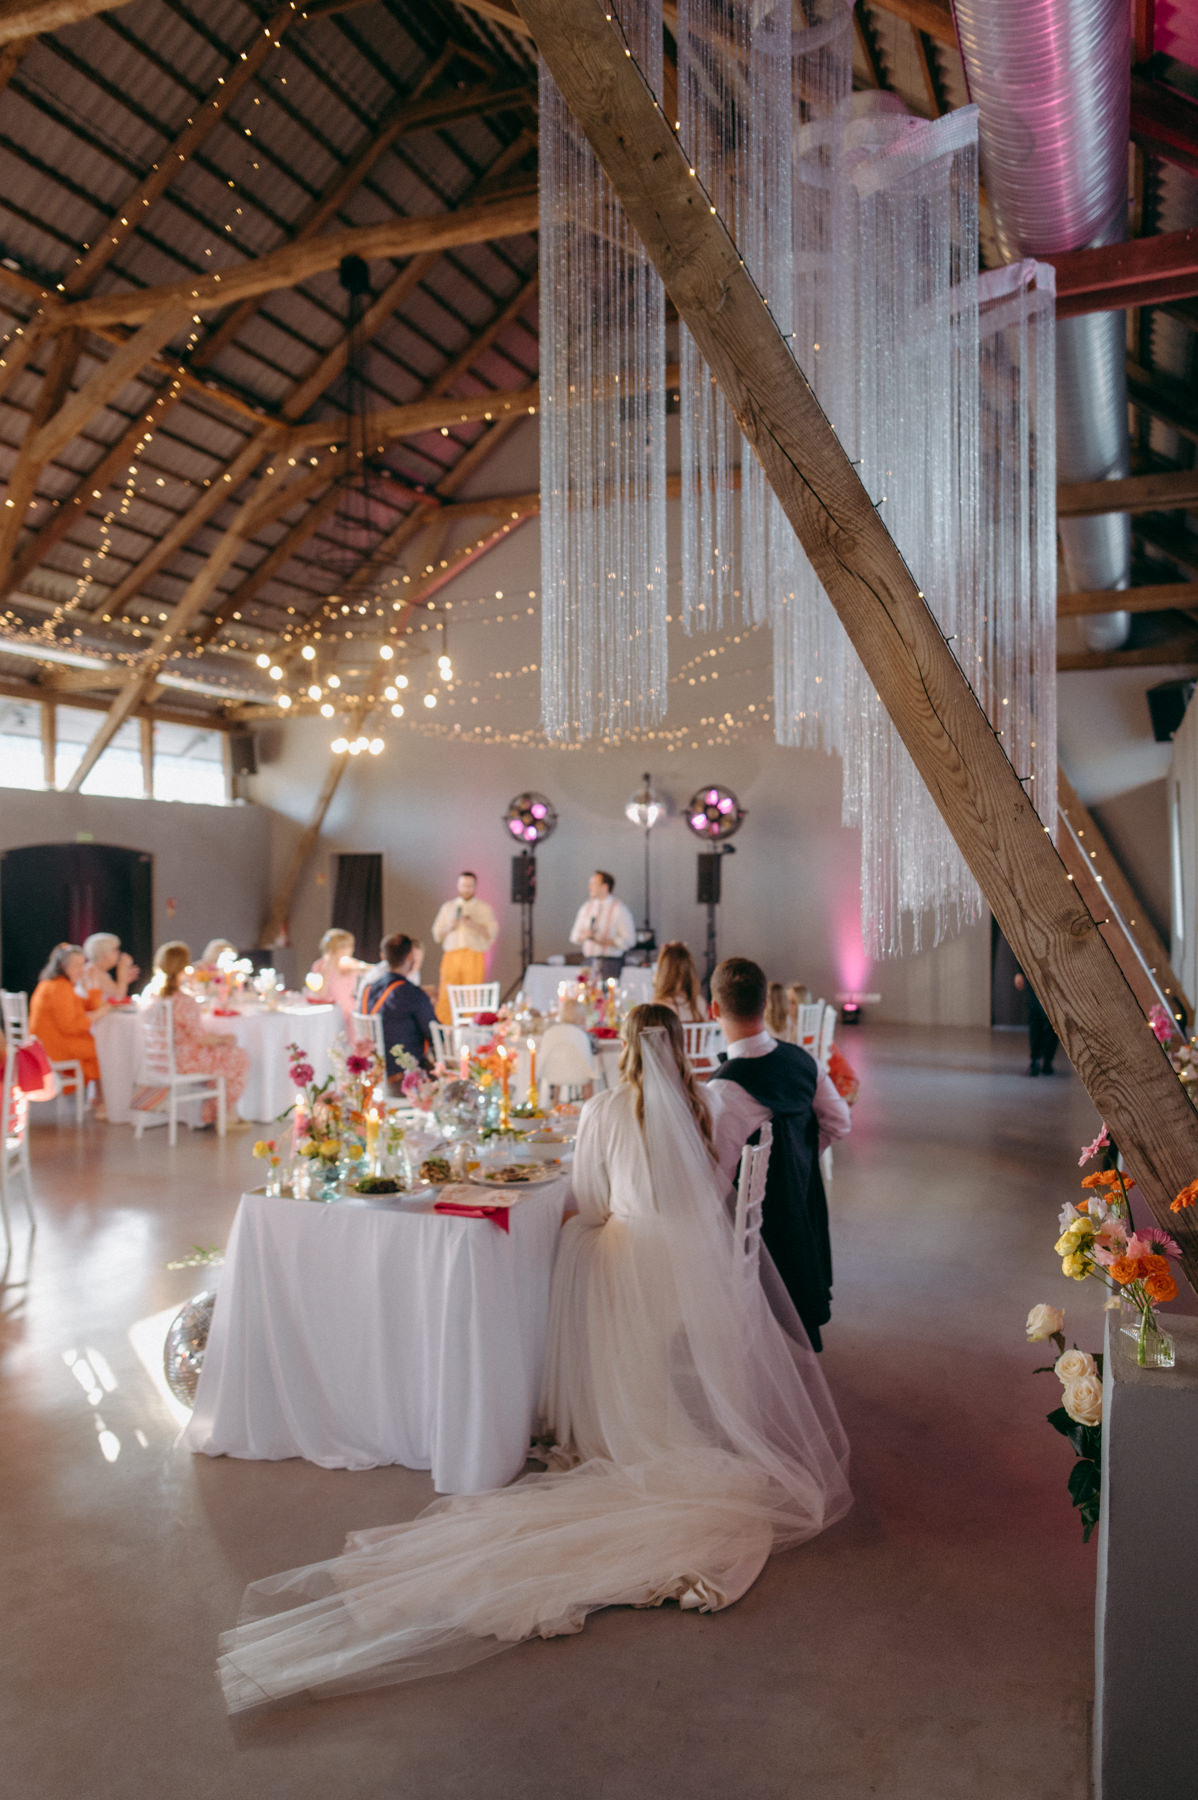 ROMANTIC WEDDING AT ZOLTNERS BREWERY BARN